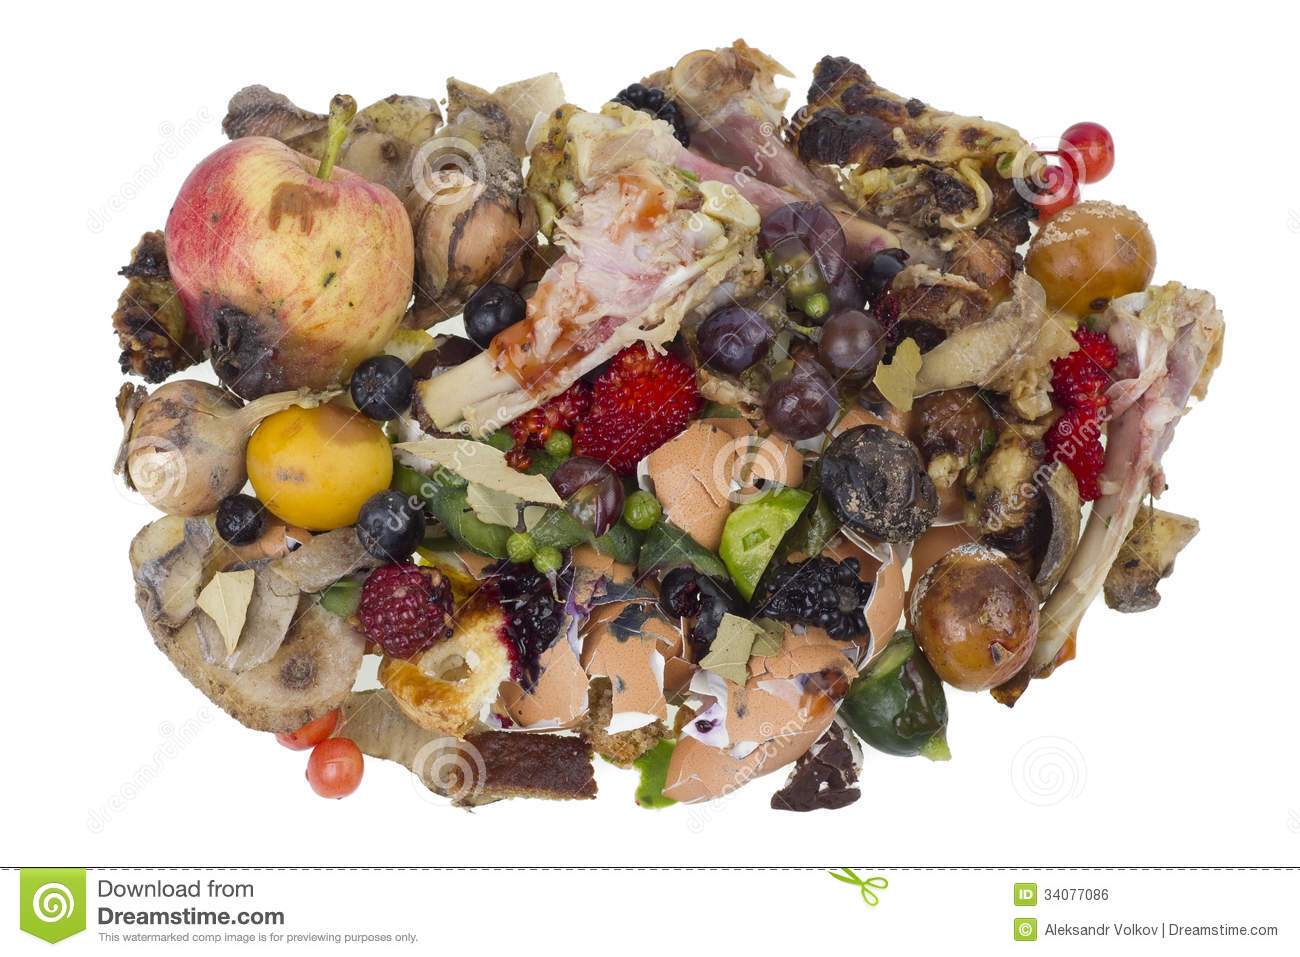 Spoiled Food Clipart Rotten Food Waste Isolated